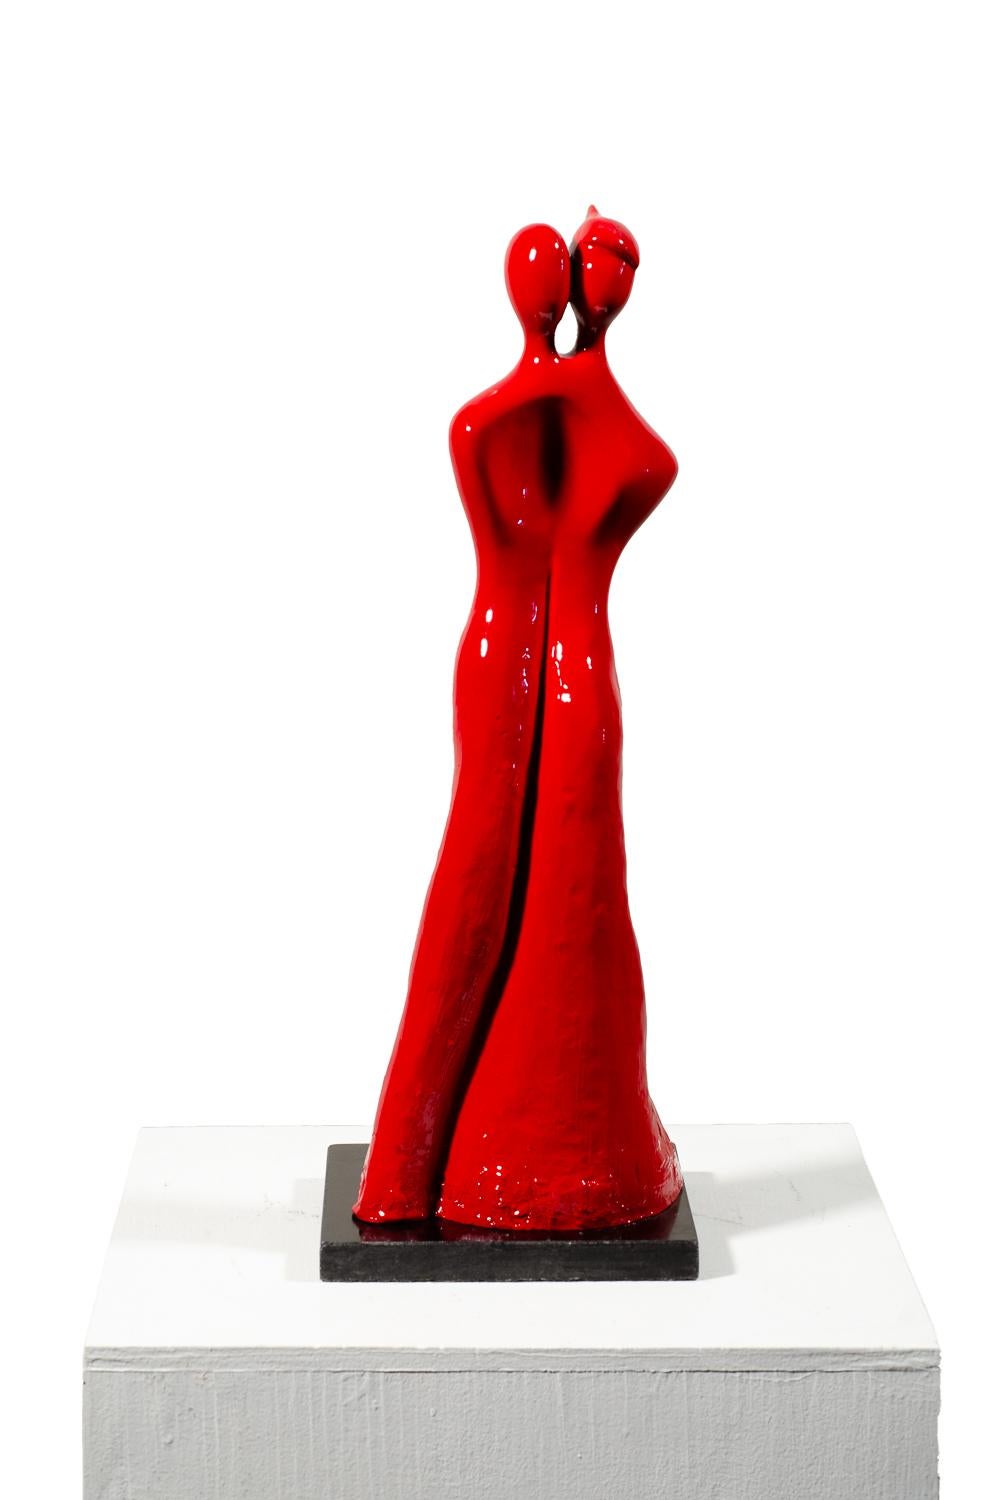 Soul Mates #1 (in red) When in love, their souls and bodies fuse into just one. - Sculpture by Beatriz Gerenstein